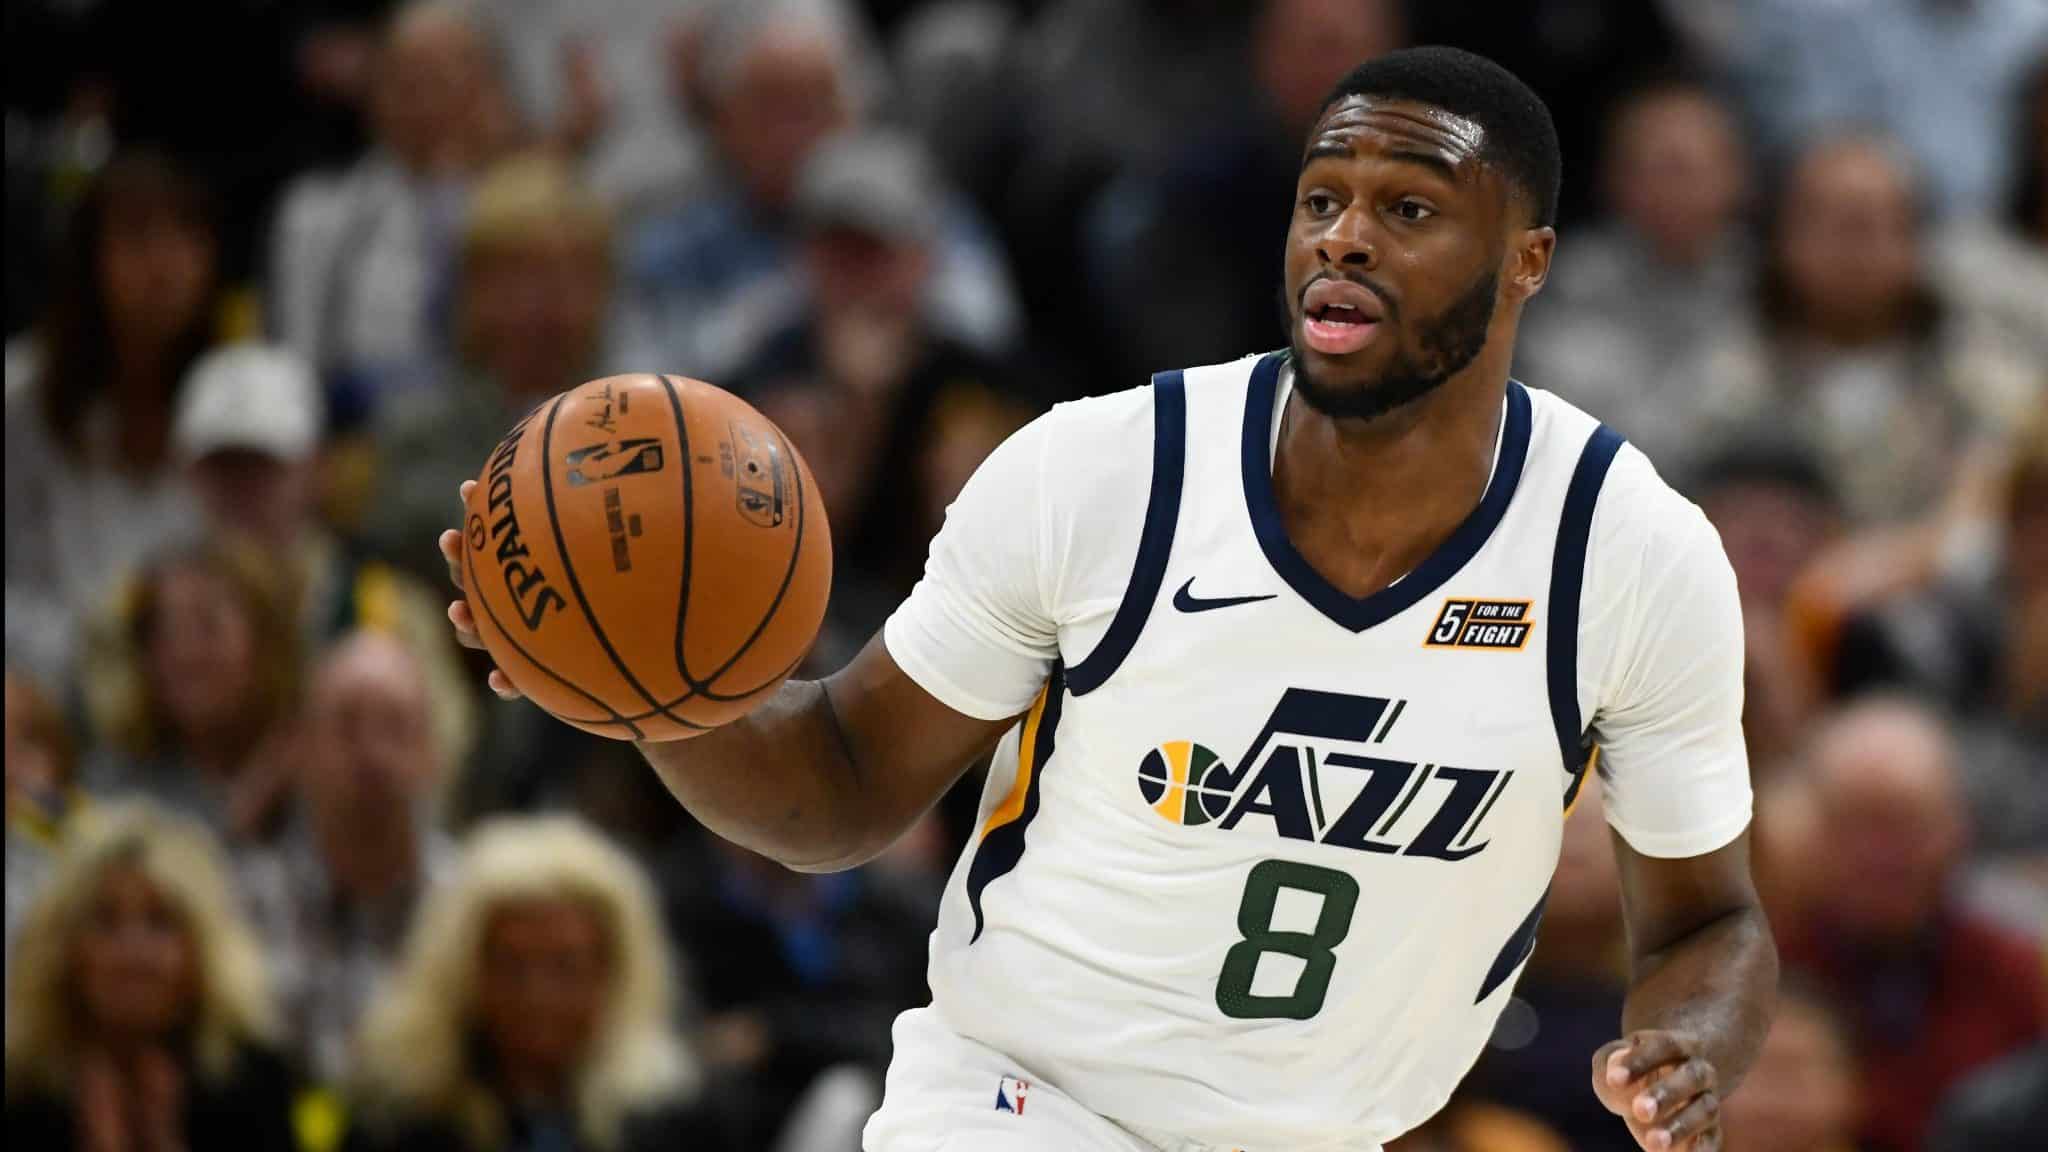 SALT LAKE CITY, UT - OCTOBER 23: Emmanuel Mudiay #8 of the Utah Jazz in action during a opening night game against the Oklahoma City Thunder at Vivint Smart Home Arena on October 23, 2019 in Salt Lake City, Utah. NOTE TO USER: User expressly acknowledges and agrees that, by downloading and or using this photograph, User is consenting to the terms and conditions of the Getty Images License Agreement.